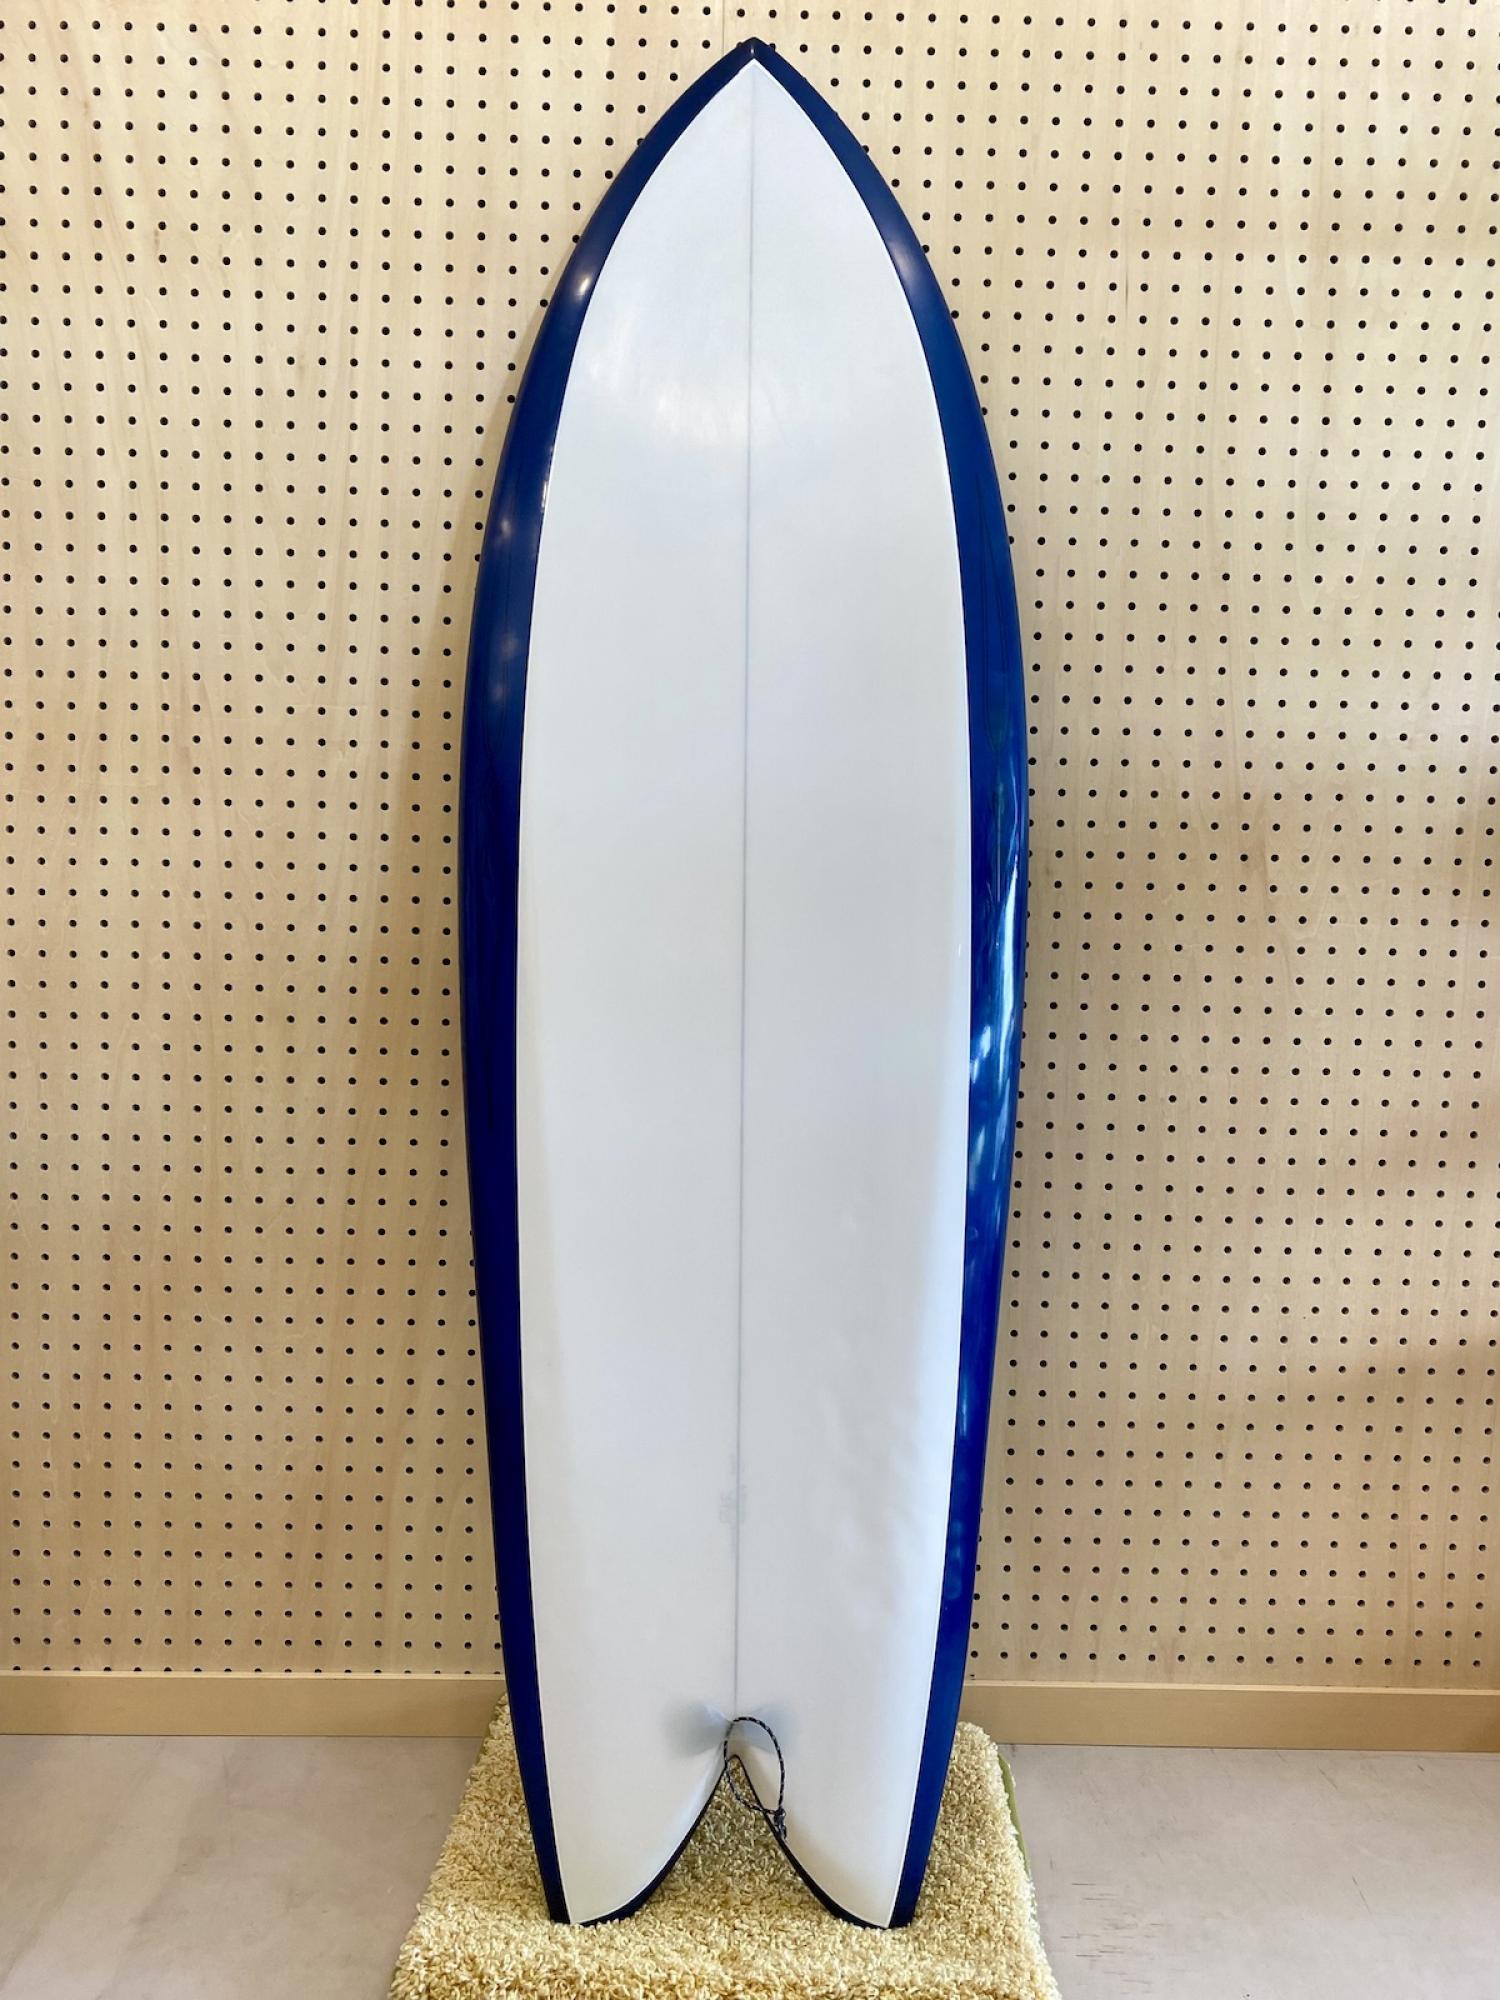 USED BOARDS(5.6 SQUIT FISH RYAN BURCH SURFBOARDS)